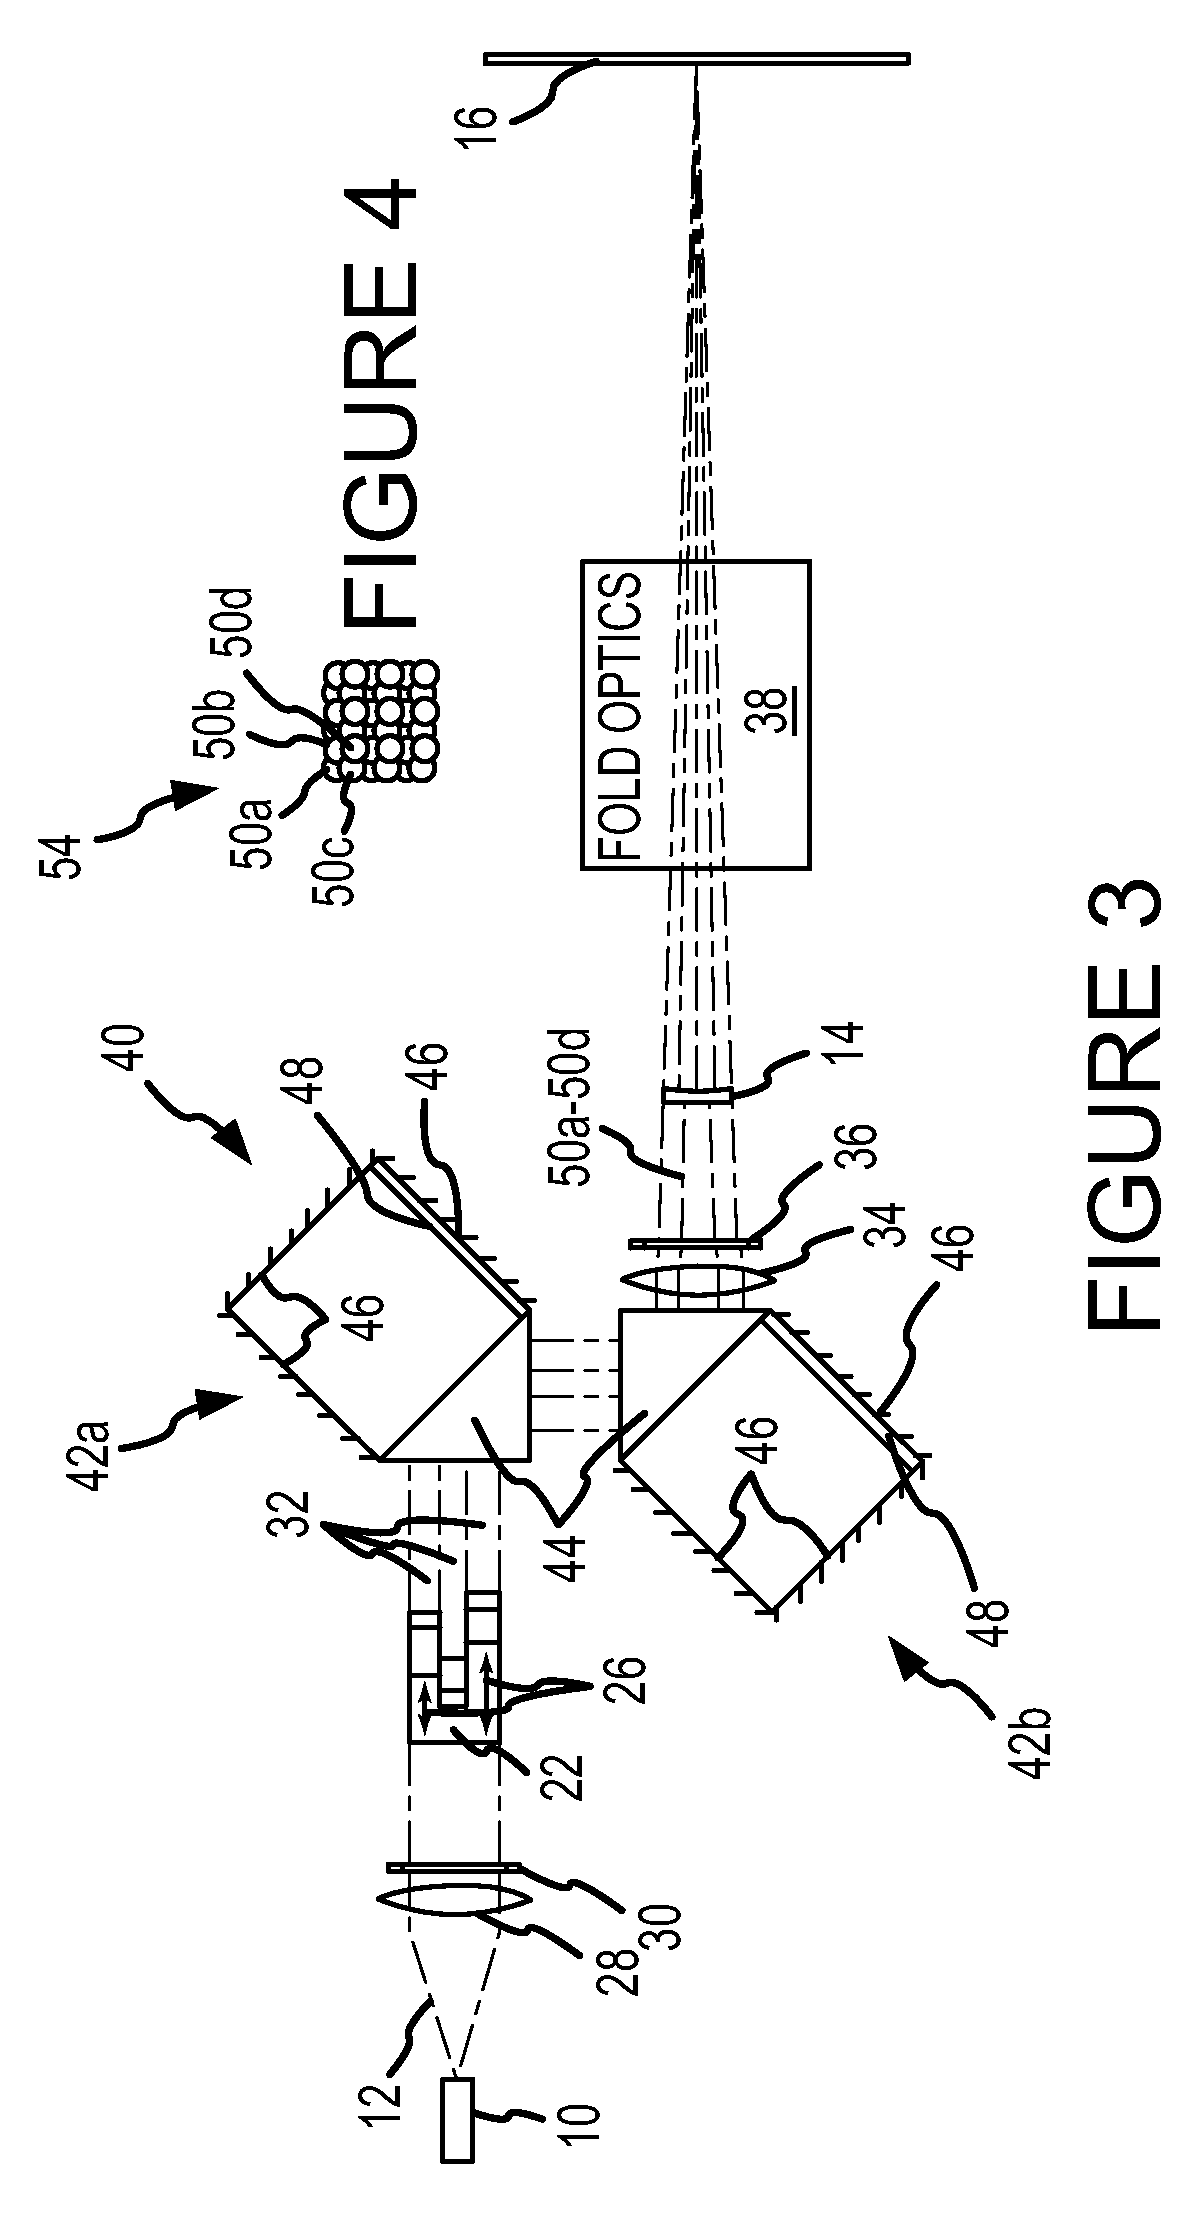 Apparent speckle reduction apparatus and method for MEMS laser projection system